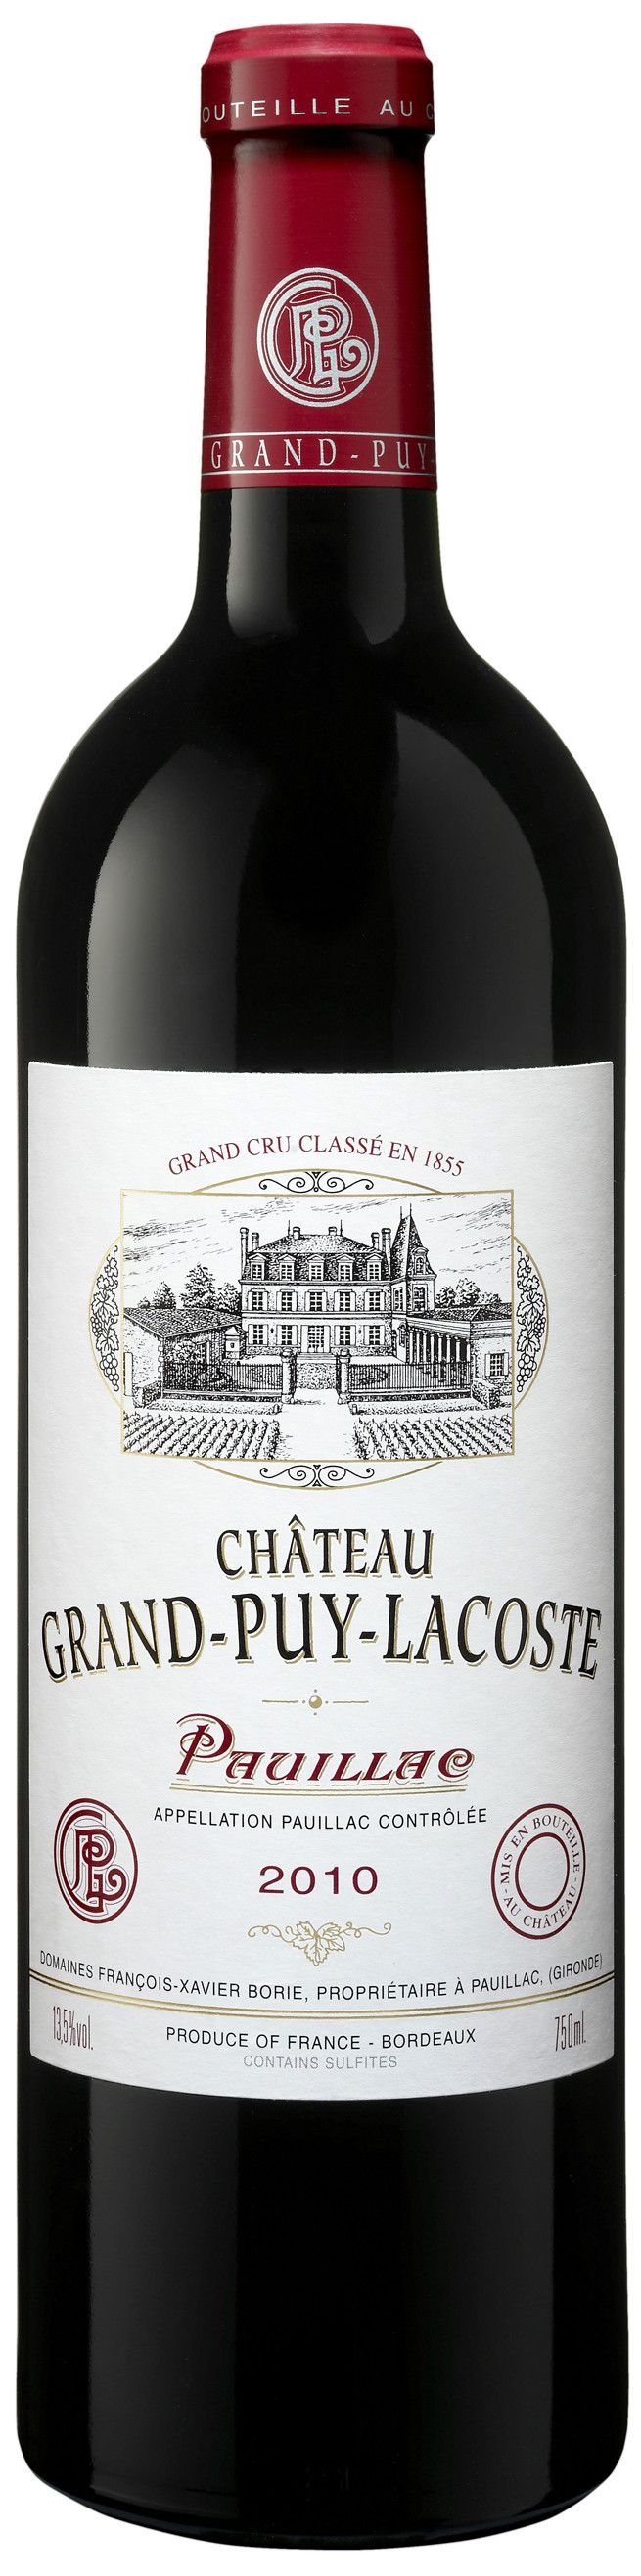 Chateau Grand-Puy-Lacoste, 2007